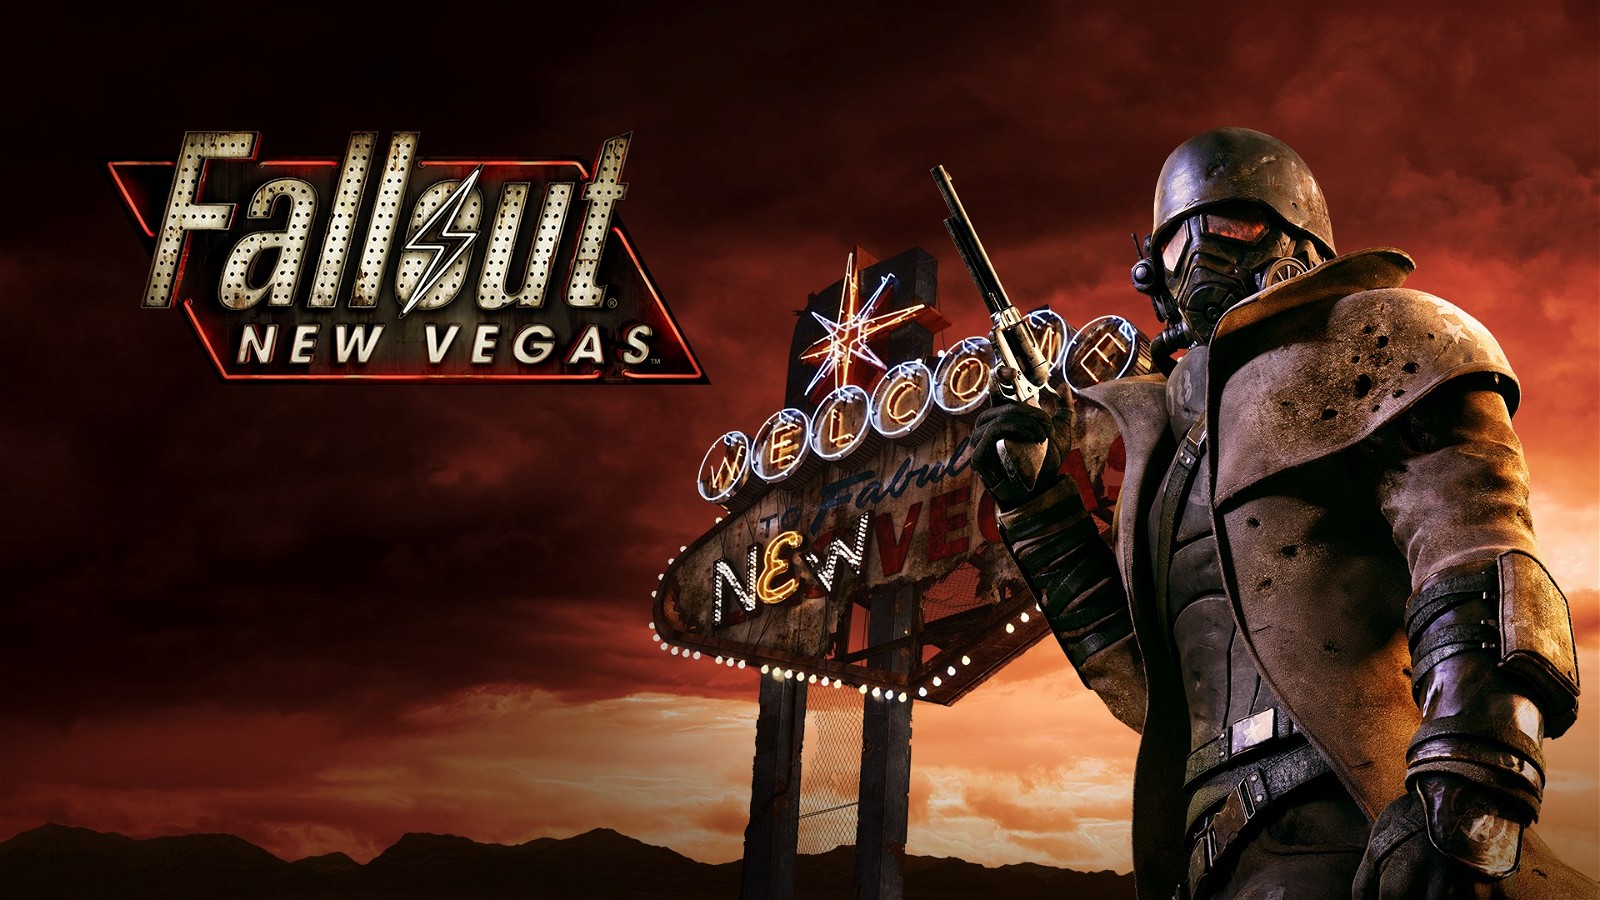 Fallout: New Vegas is the only entry in the series to be made by a different studio.